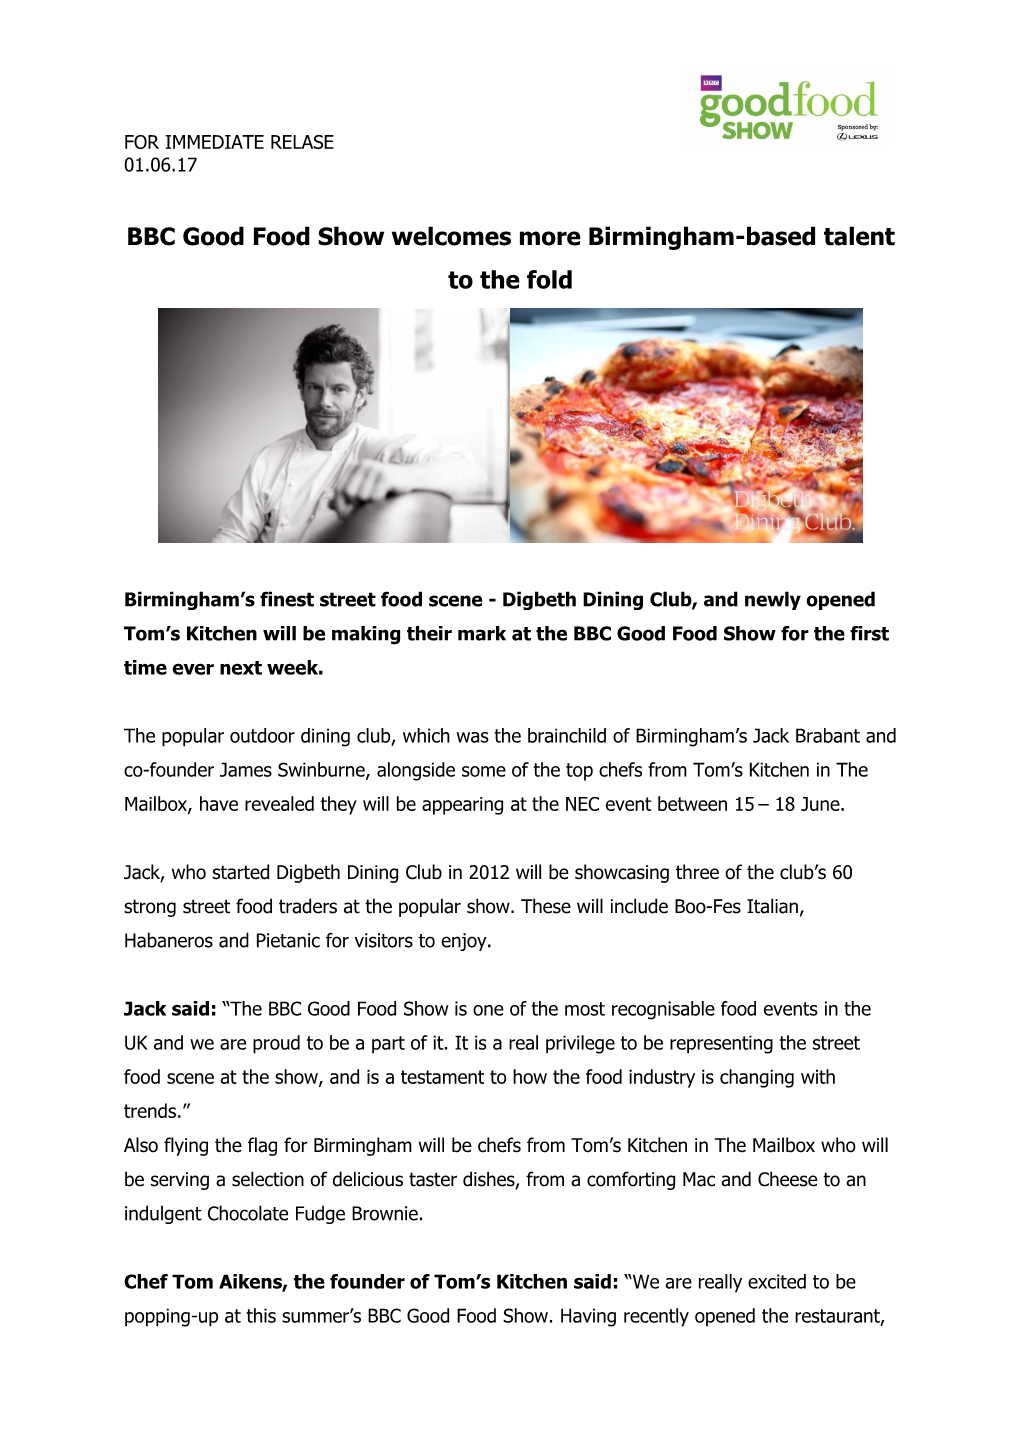 BBC Good Food Show Welcomes More Birmingham-Based Talent to the Fold